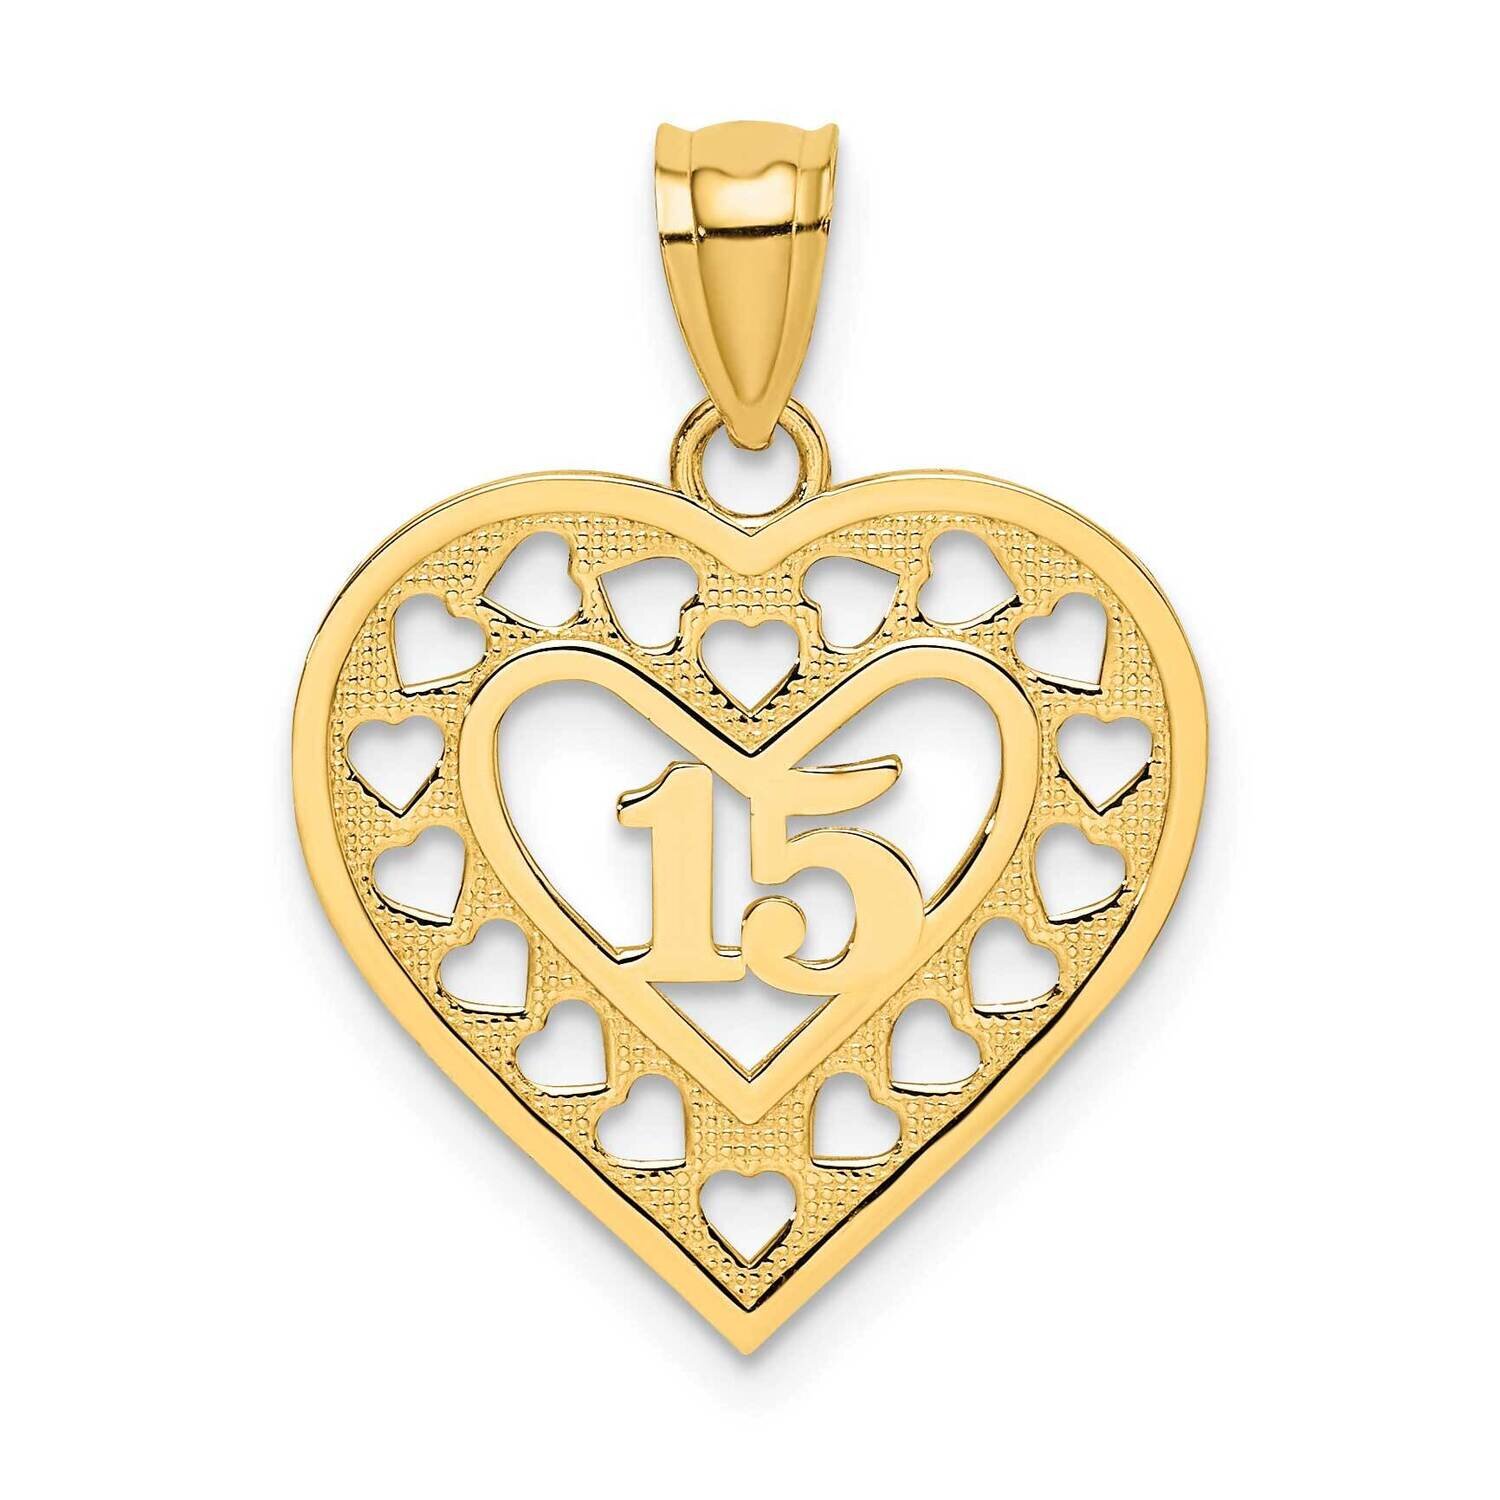 15 In Cut-Out Heart Charm 14k Gold K8851